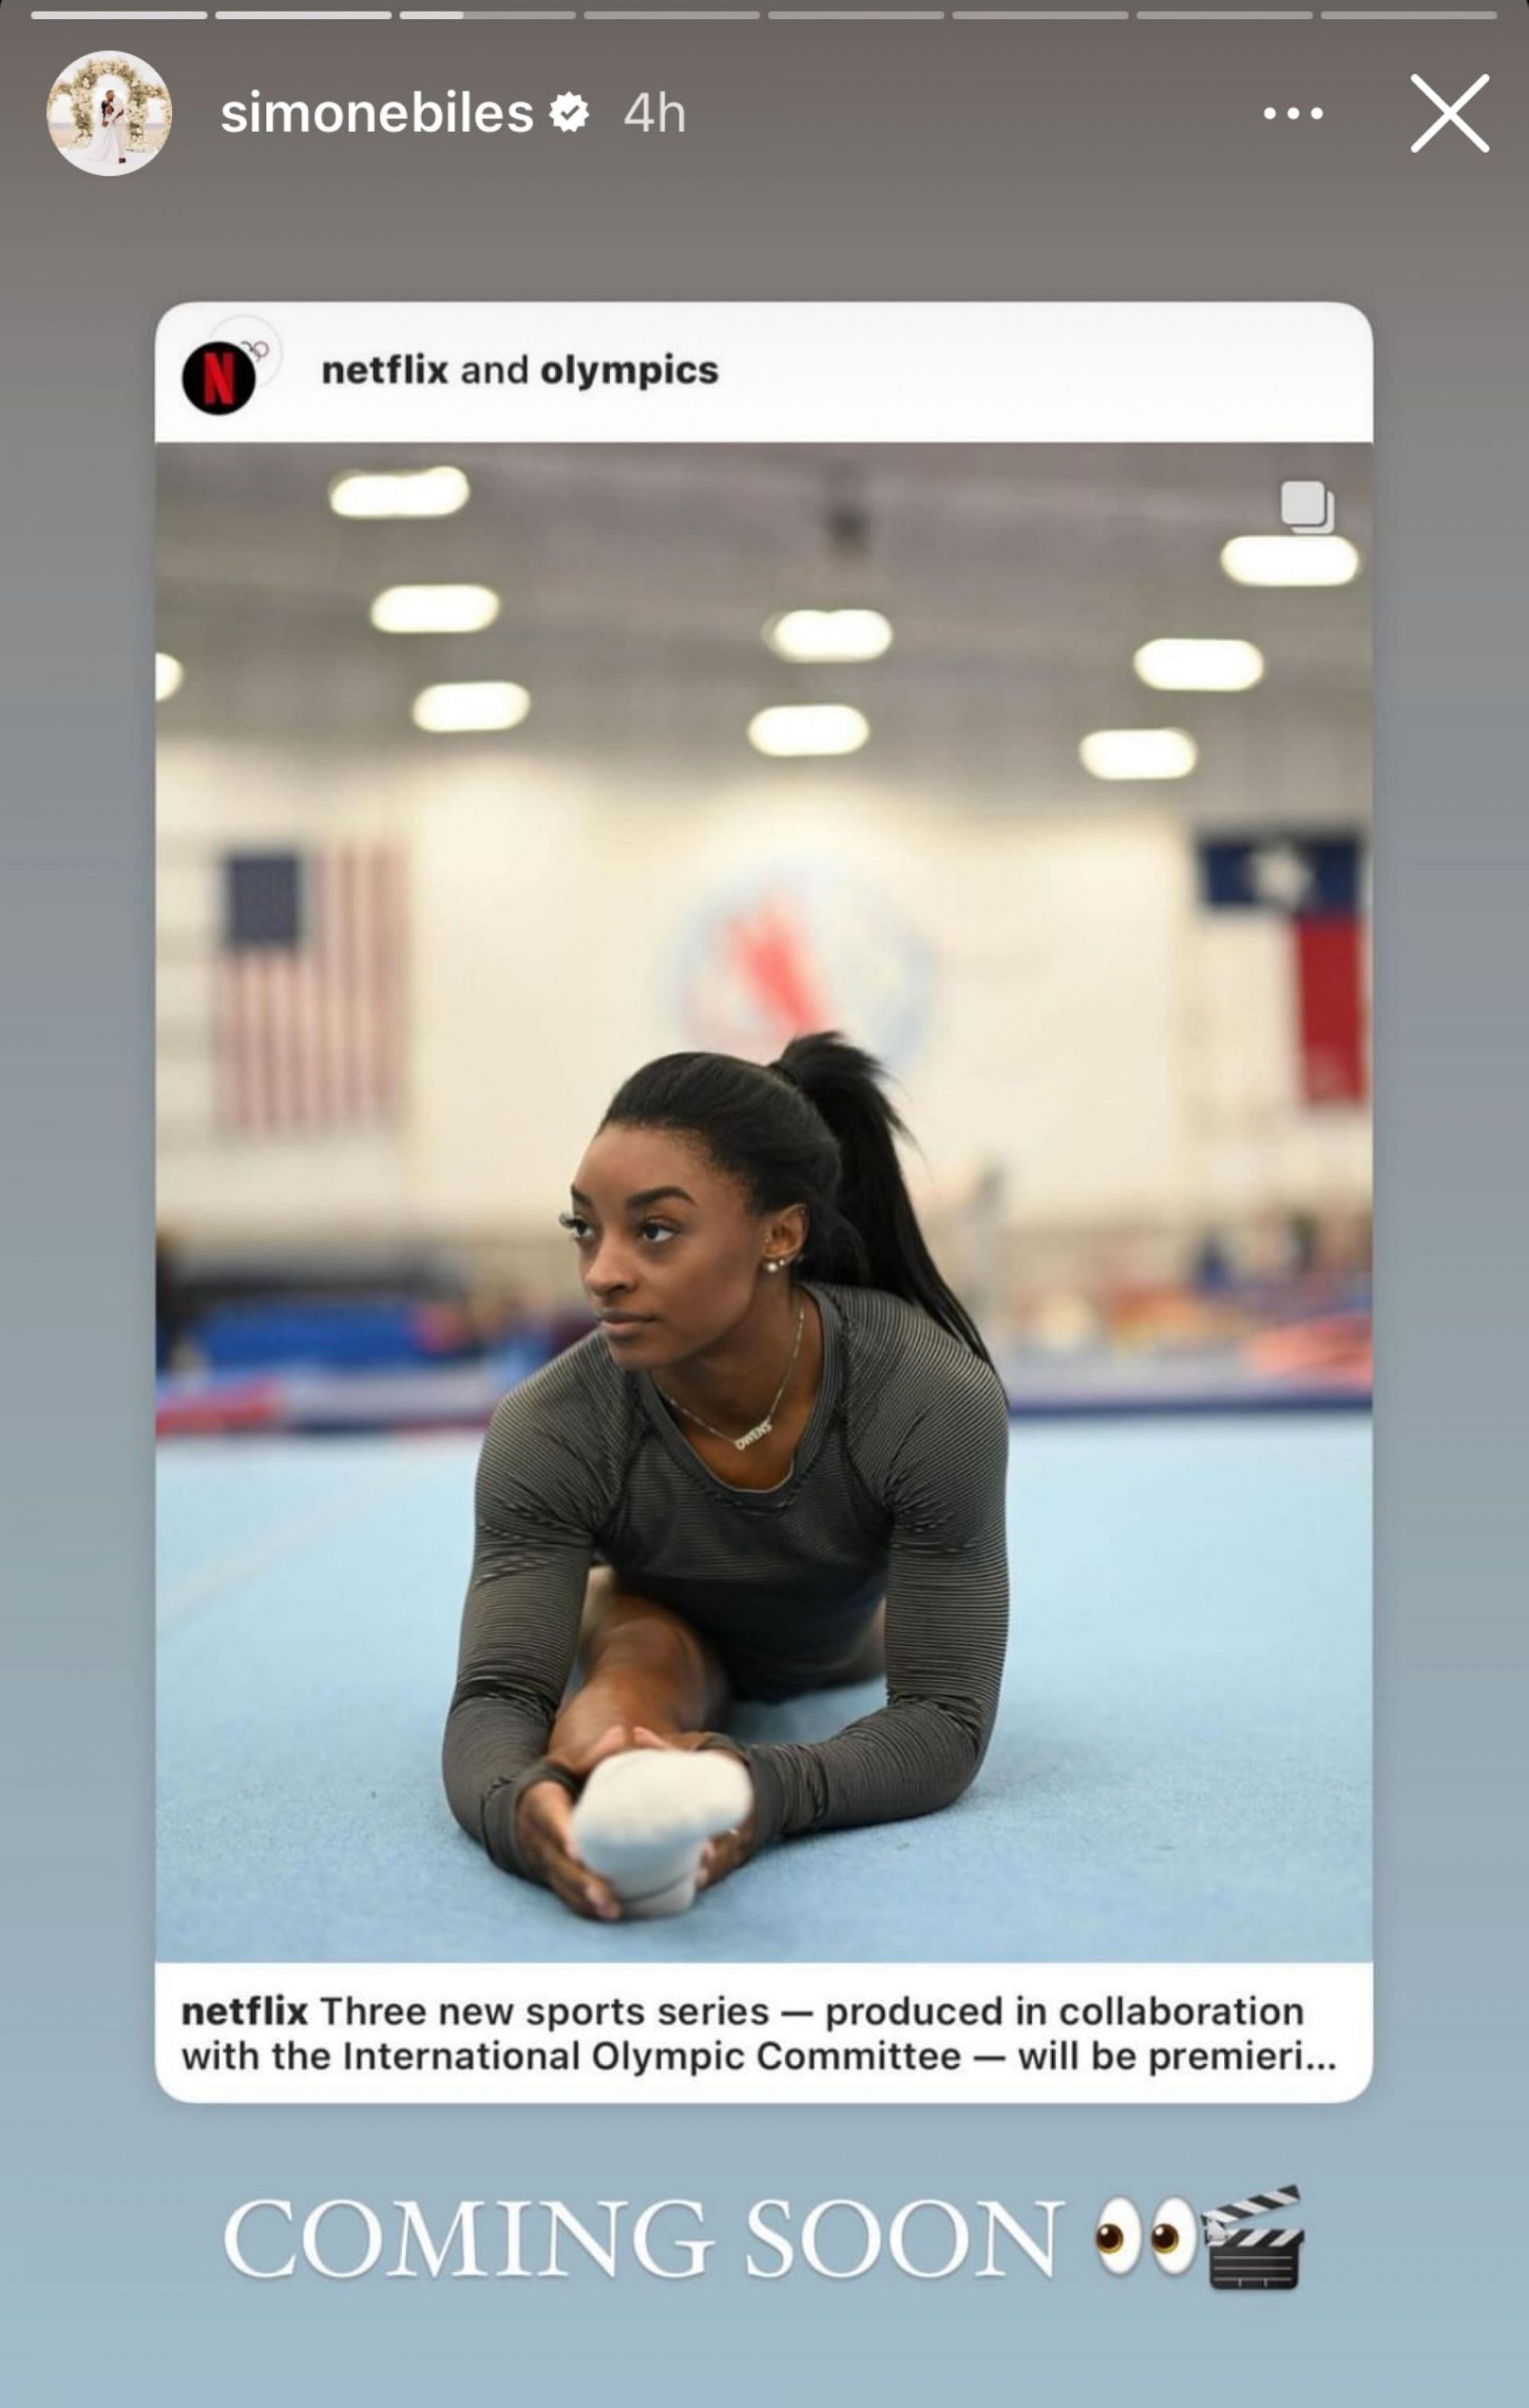 Simone Biles excited for her Netflix appearance